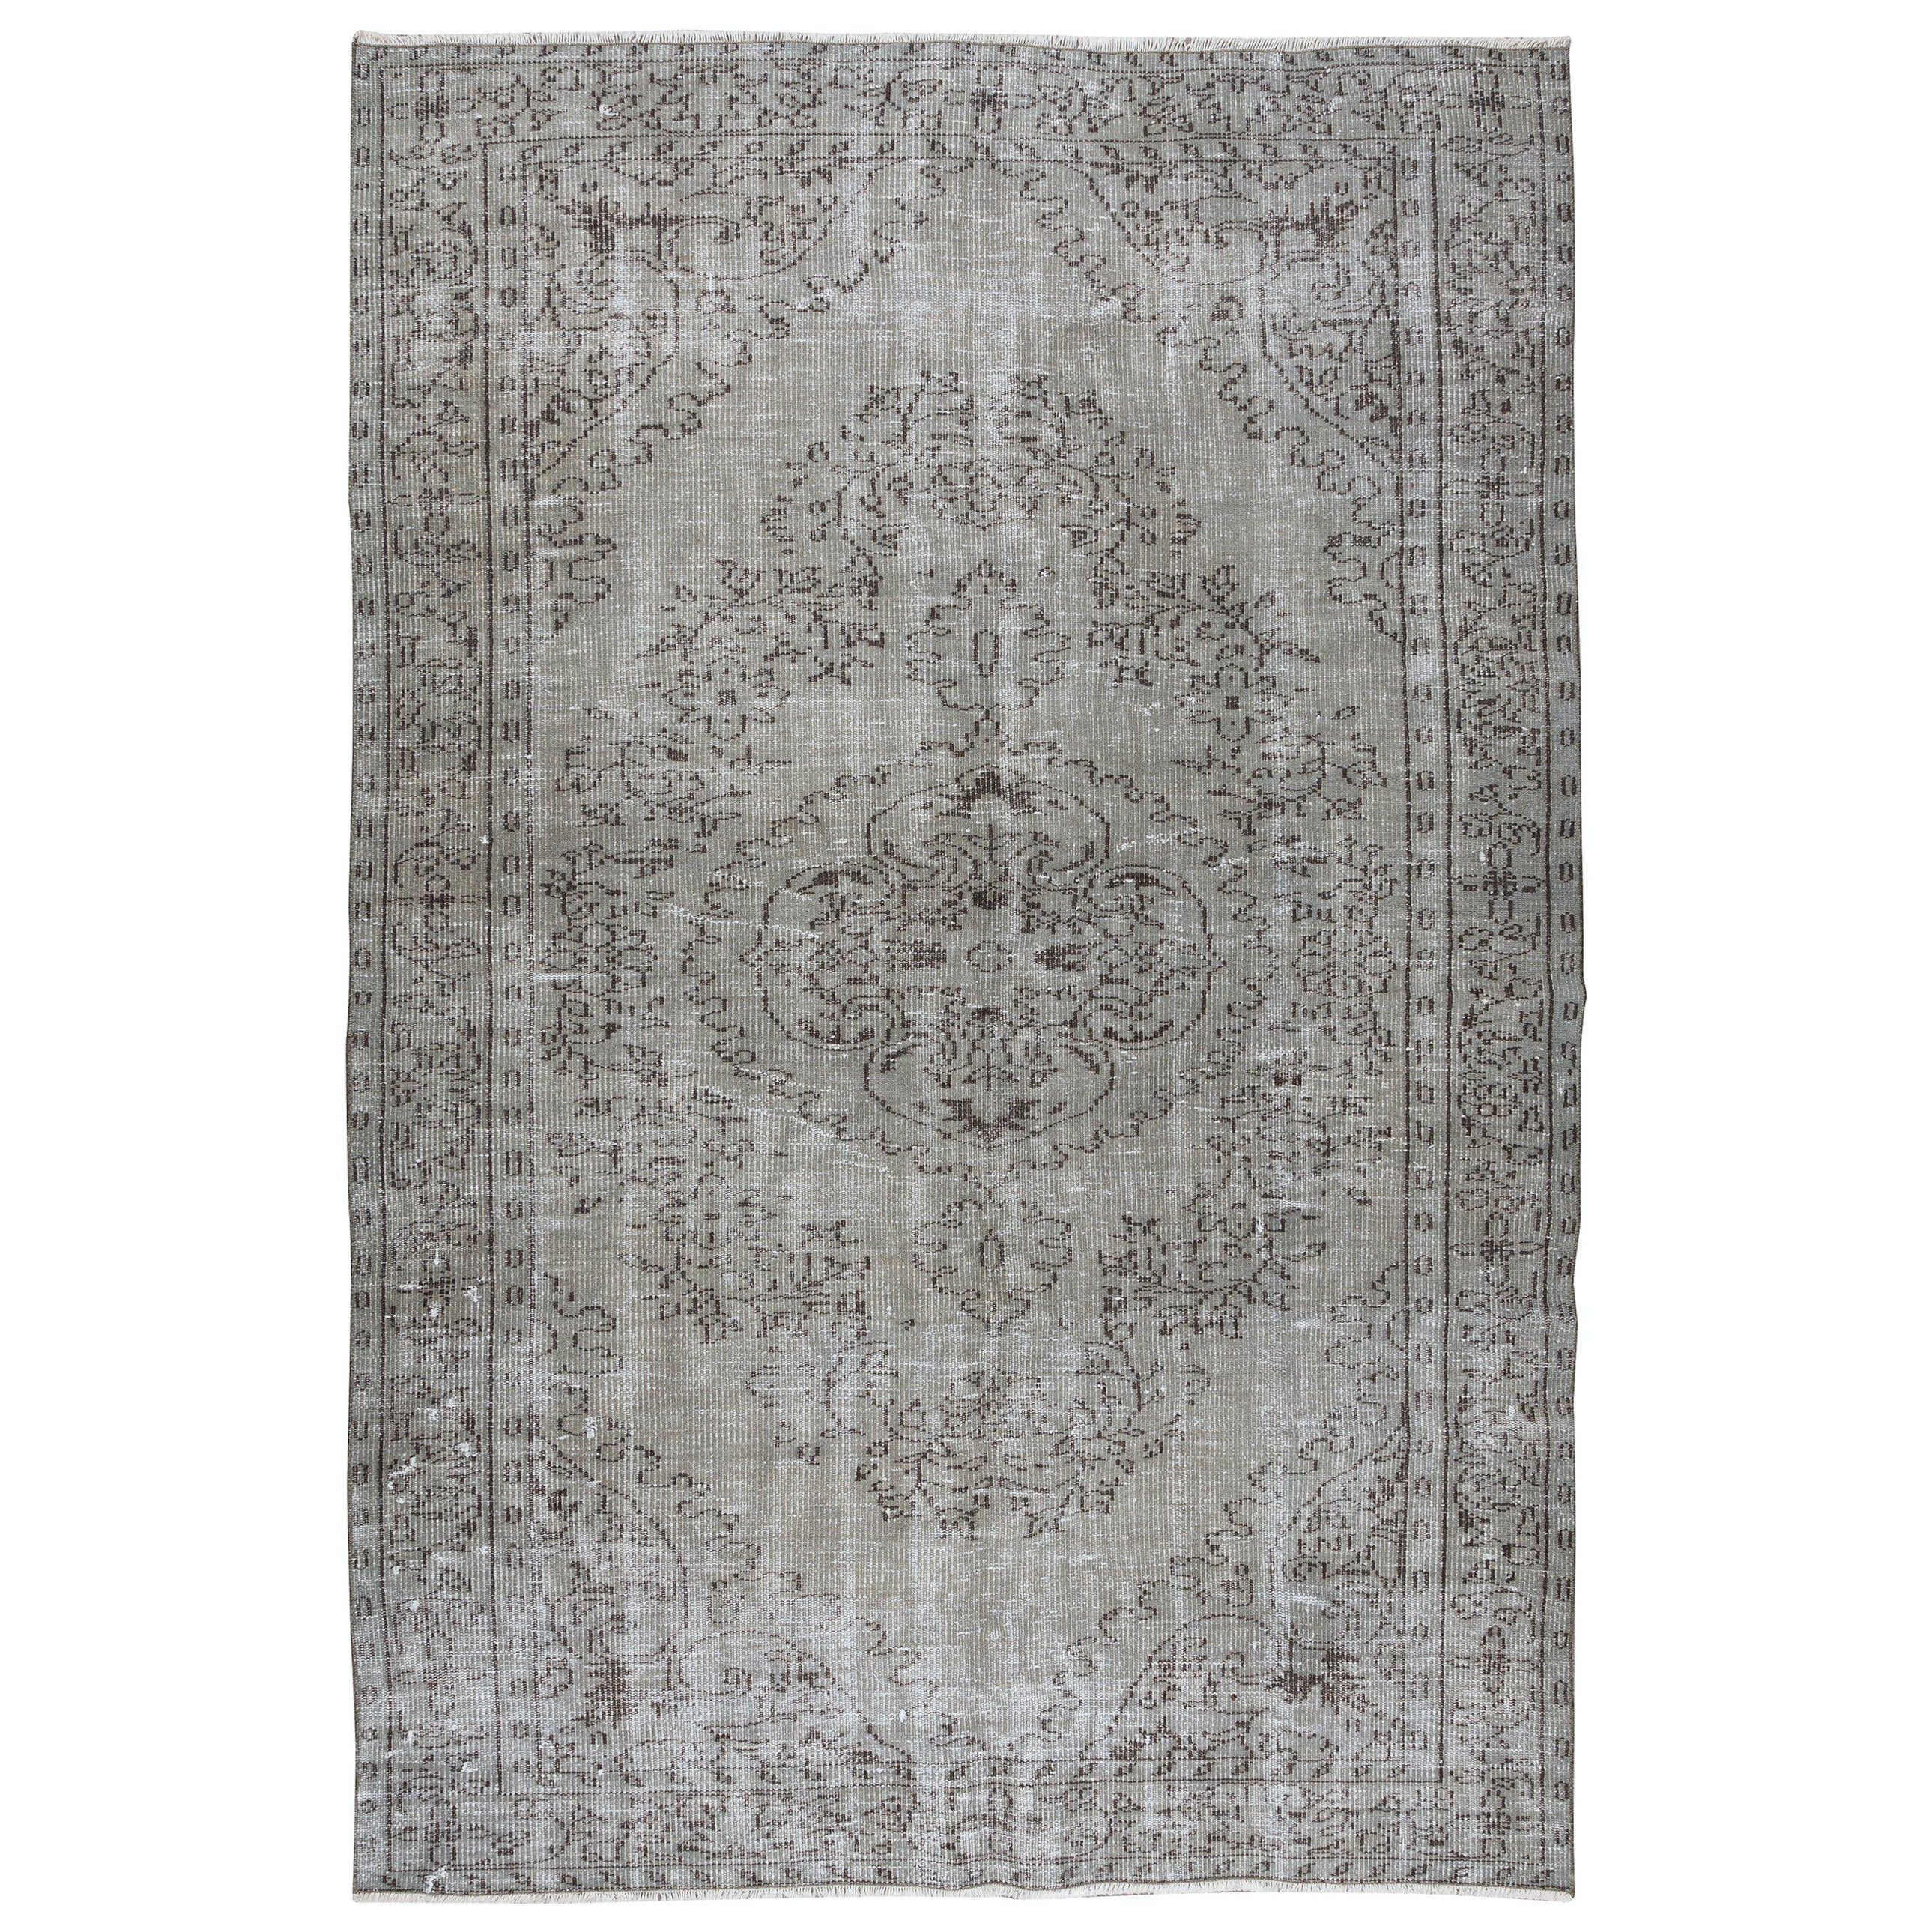 Handmade Vintage Turkish Area Rug Over-Dyed in Grey 4 Modern Interiors For Sale